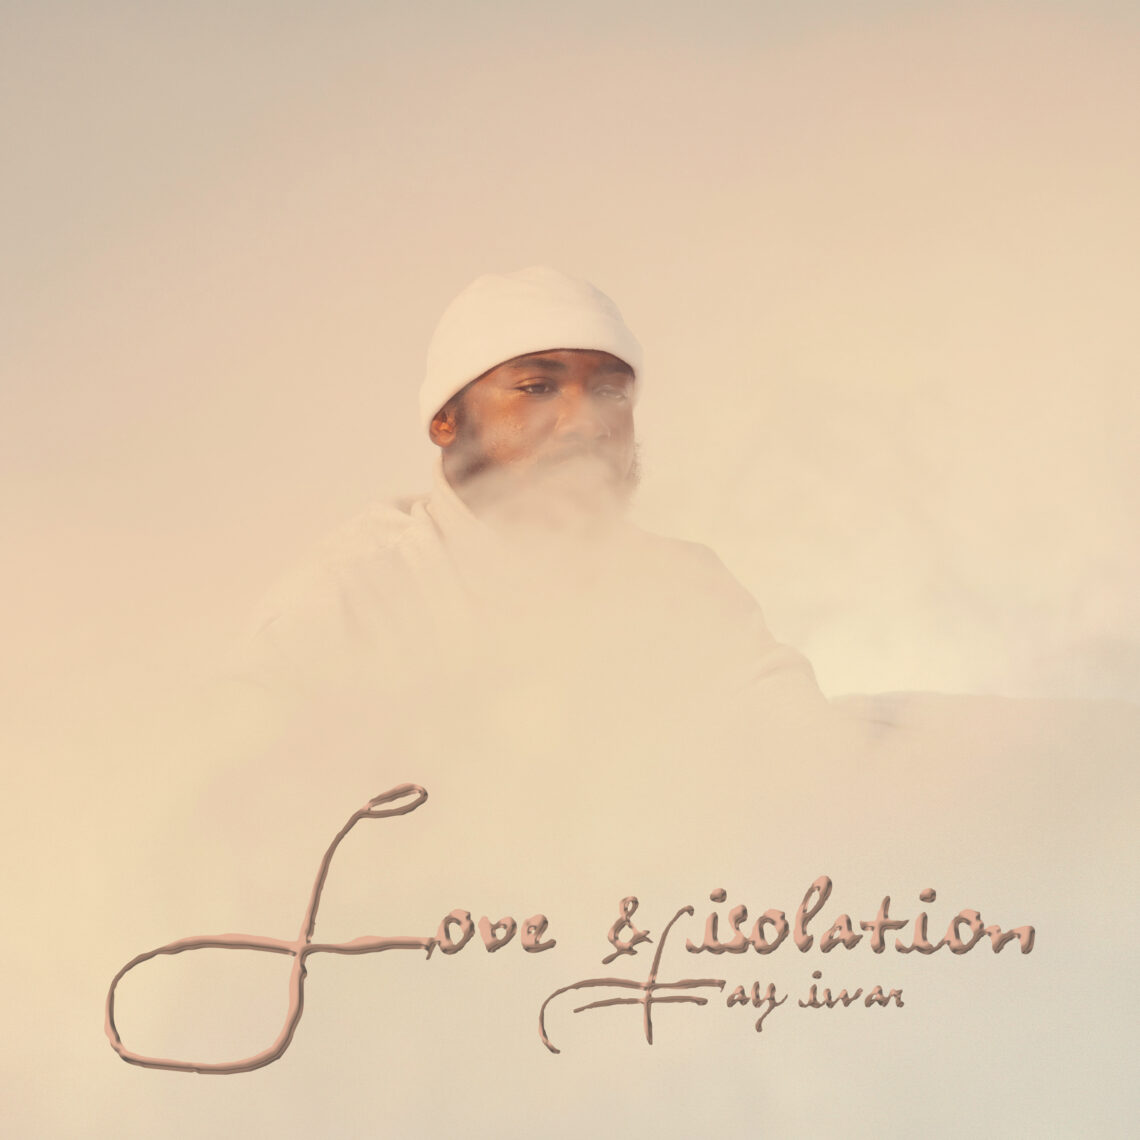 tay-iwar-love-and-isolation-1140x1140.jp